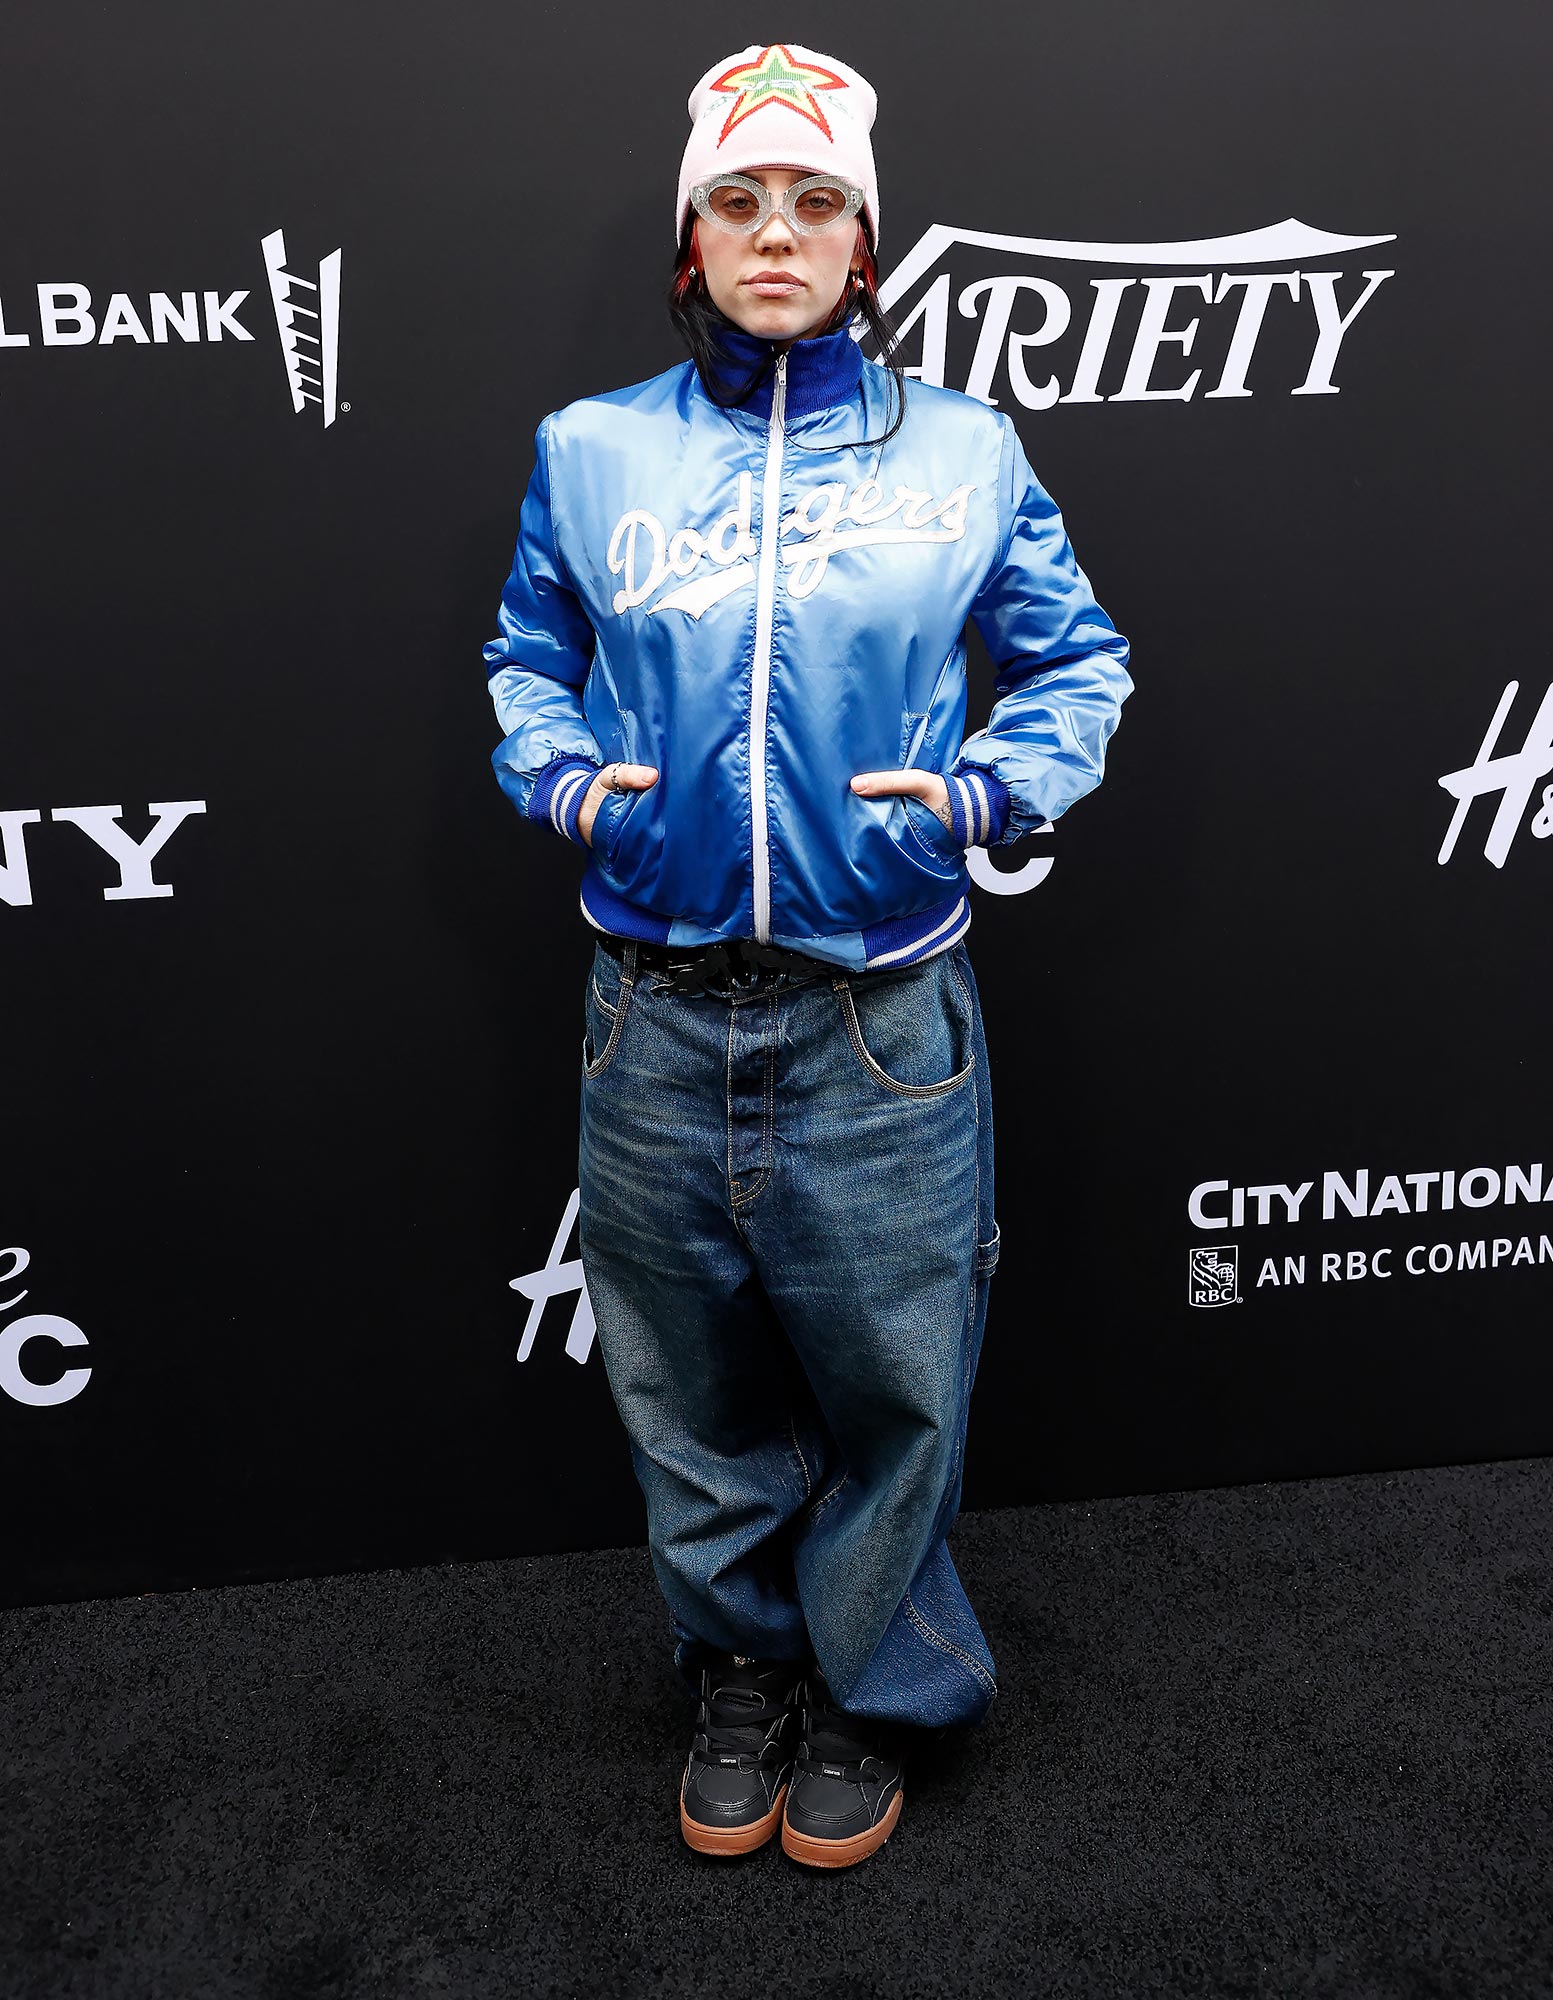 Billie Eilish accuses Variety of 'outing' her in cover story